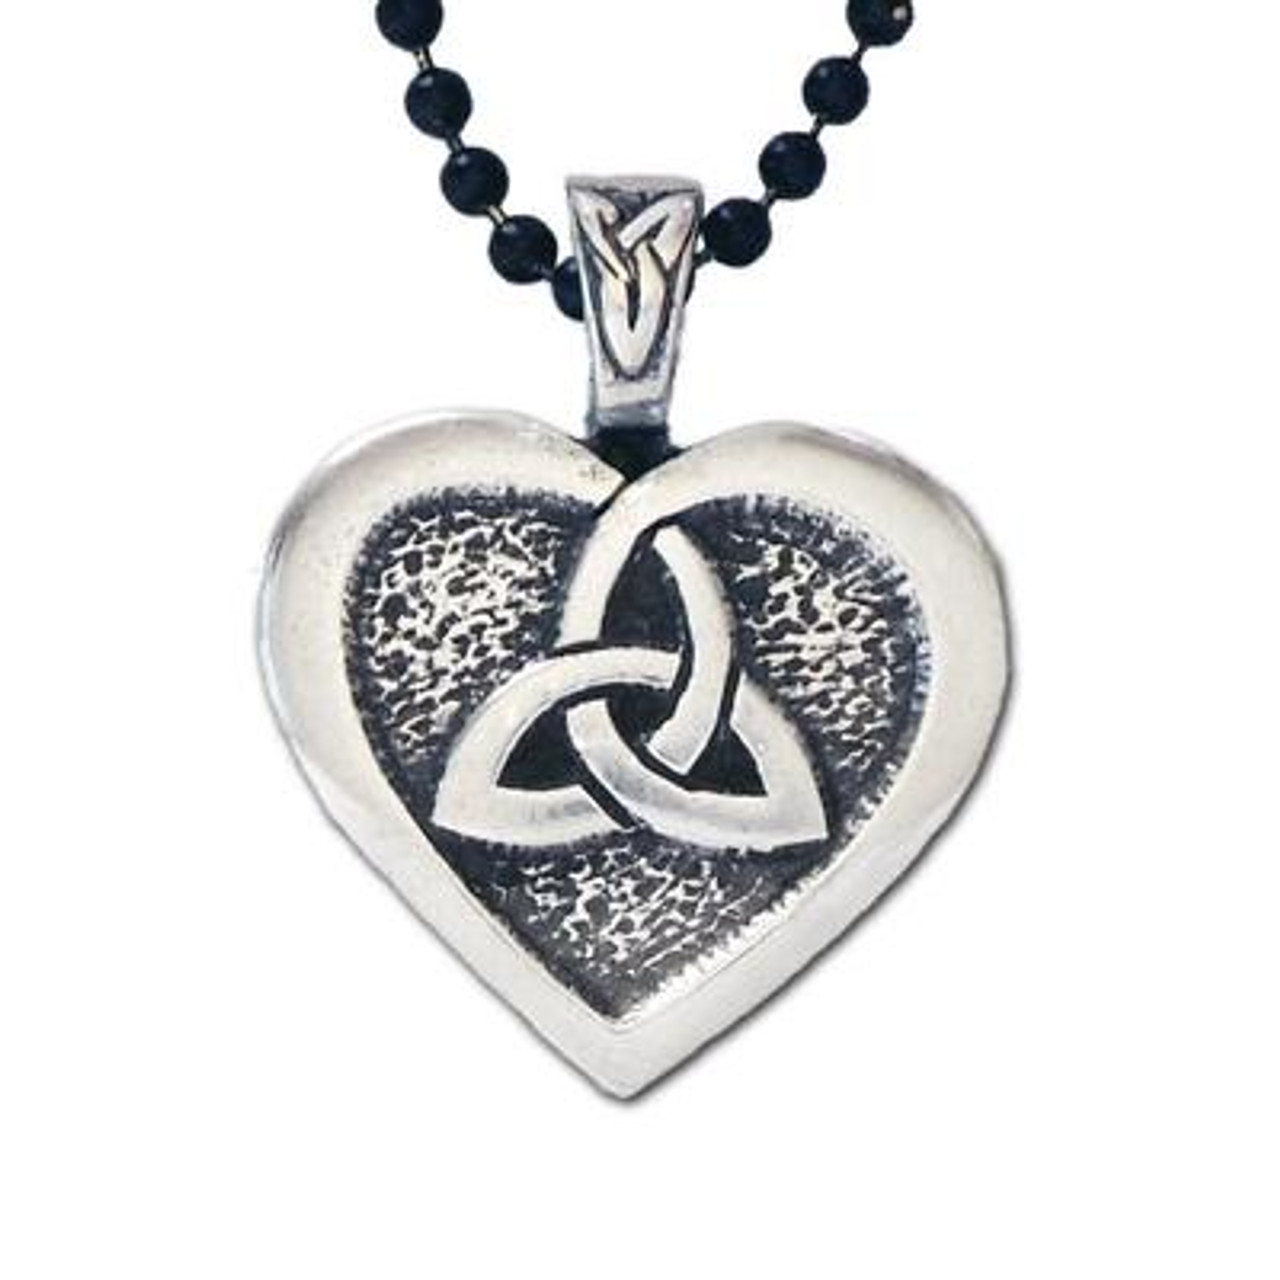 Buy Heart Necklace, Celtic Pendant, Irish Jewelry, Silver Heart Jewelry,  Trinity Knot Jewelry, Mom Gift, Anniversary Gift, Scotland Jewelry Online  in India - Etsy